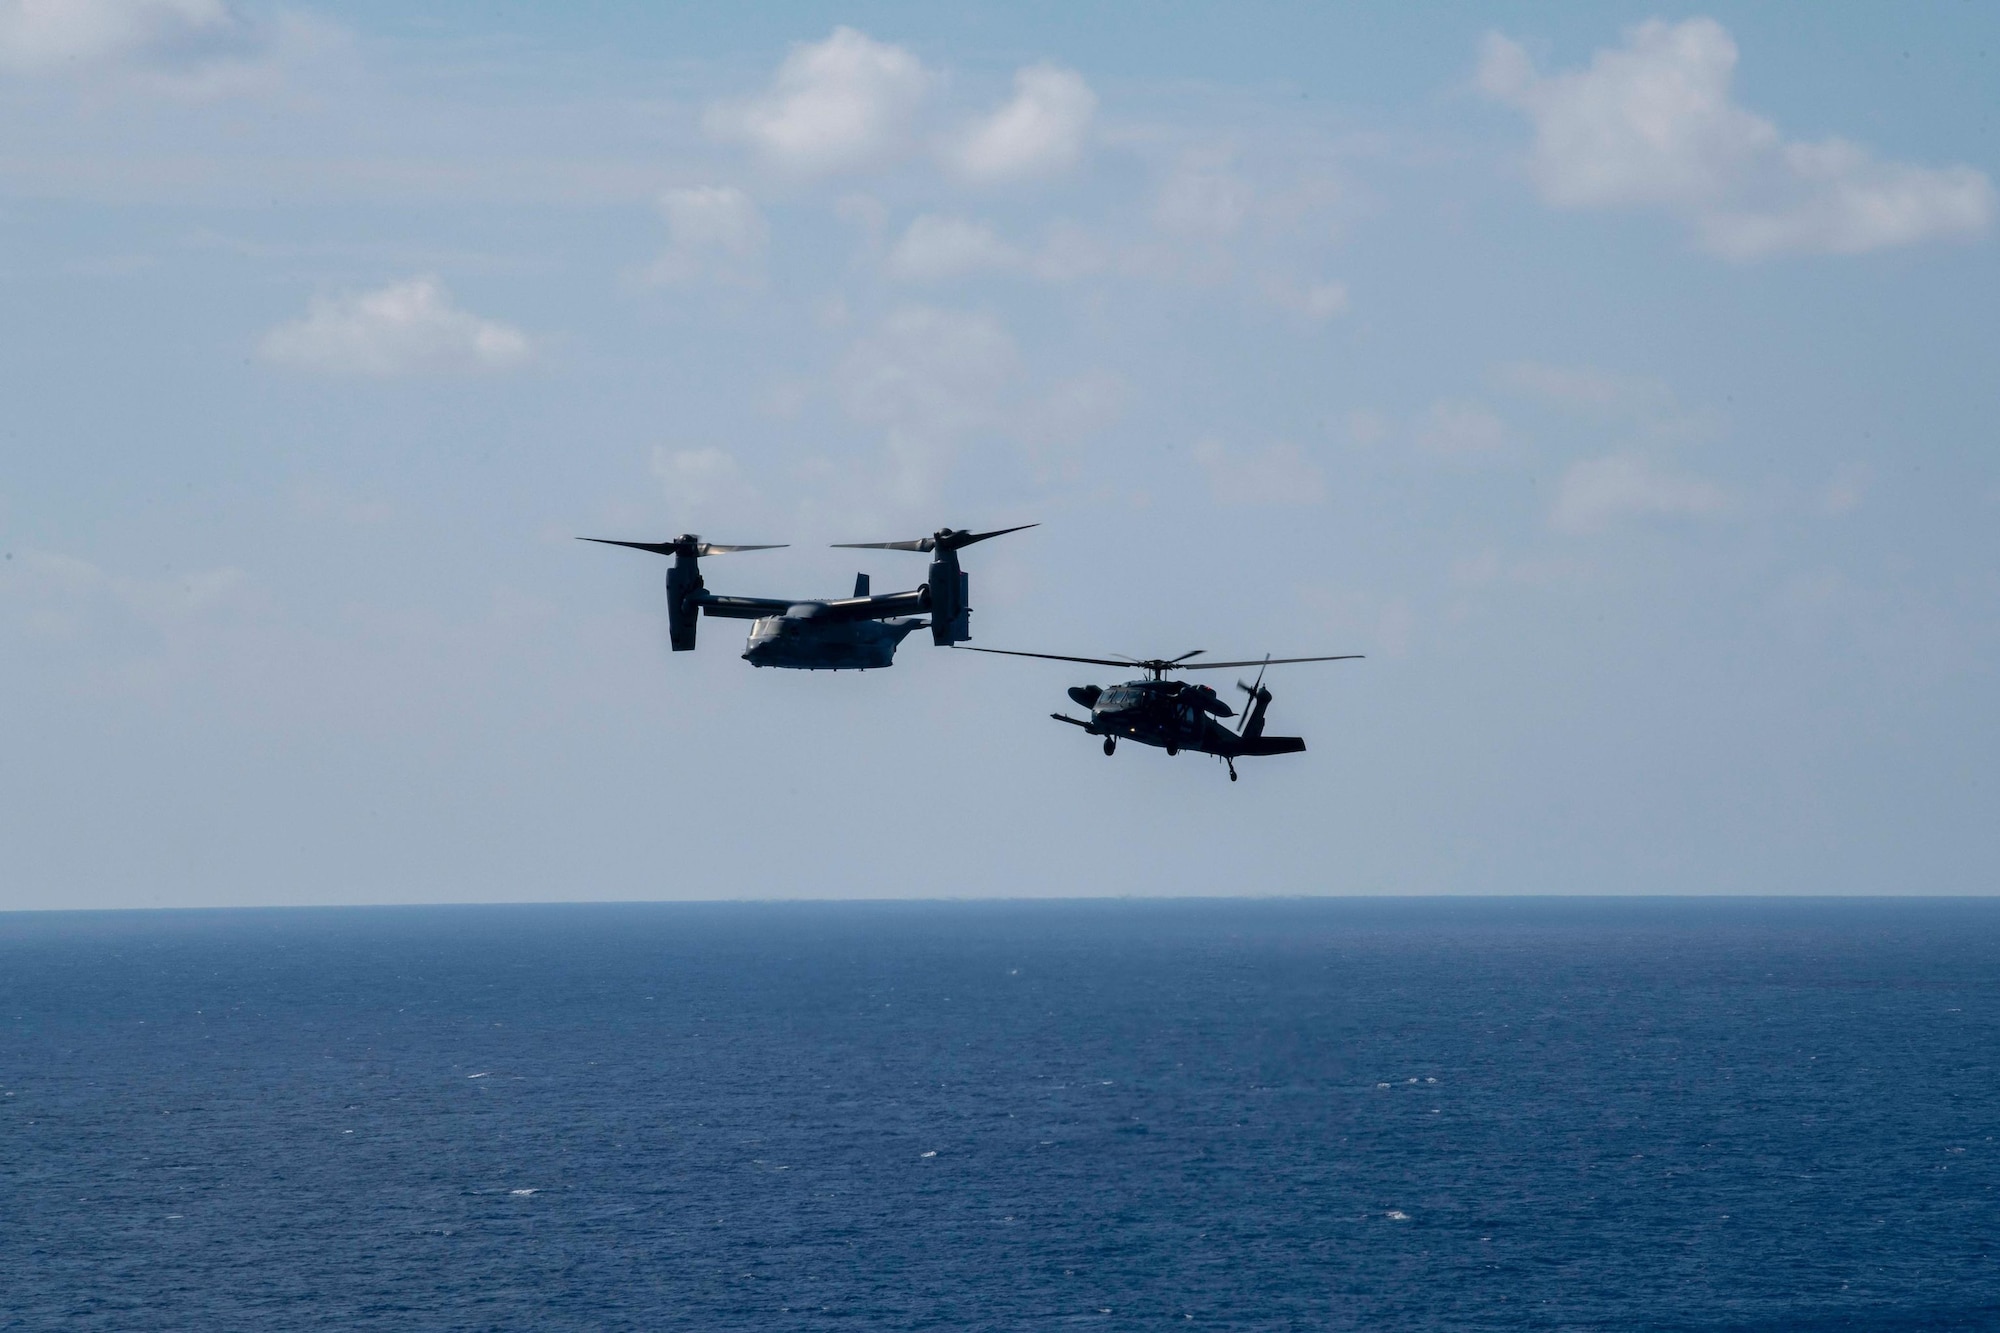 A CV-22 Osprey assigned to the 353rd Special Operations Wing flies alongside a Japanese Air Self Defense Force UH-60J assigned to Naha Air Rescue Wing on Nov 2, 2021 during a search and rescue exercise. The purpose of this training is to enhance the Japan-U.S. bilateral response capabilities to real-world emergencies. (U.S. Air Force Photo by A1C Moses Taylor)